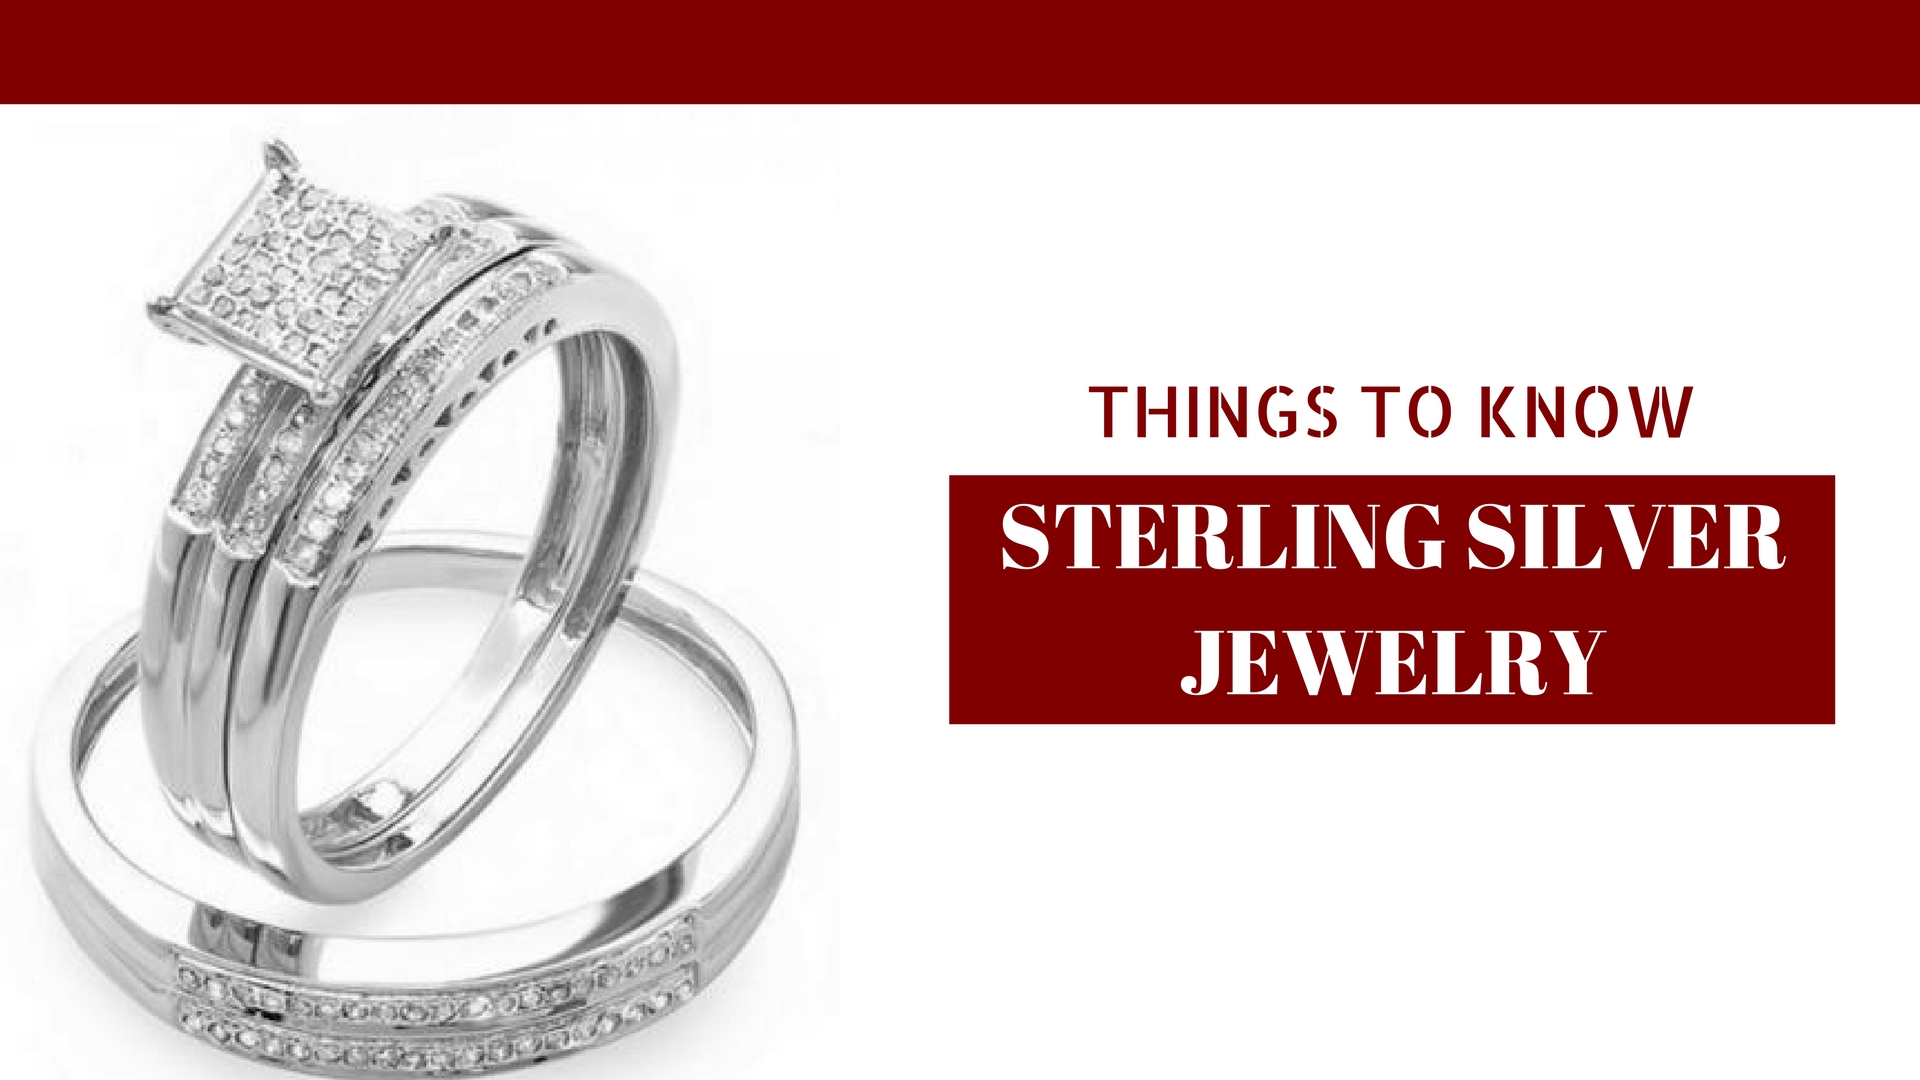 Things To Know About Sterling Silver Jewelry - Dazzling Rock